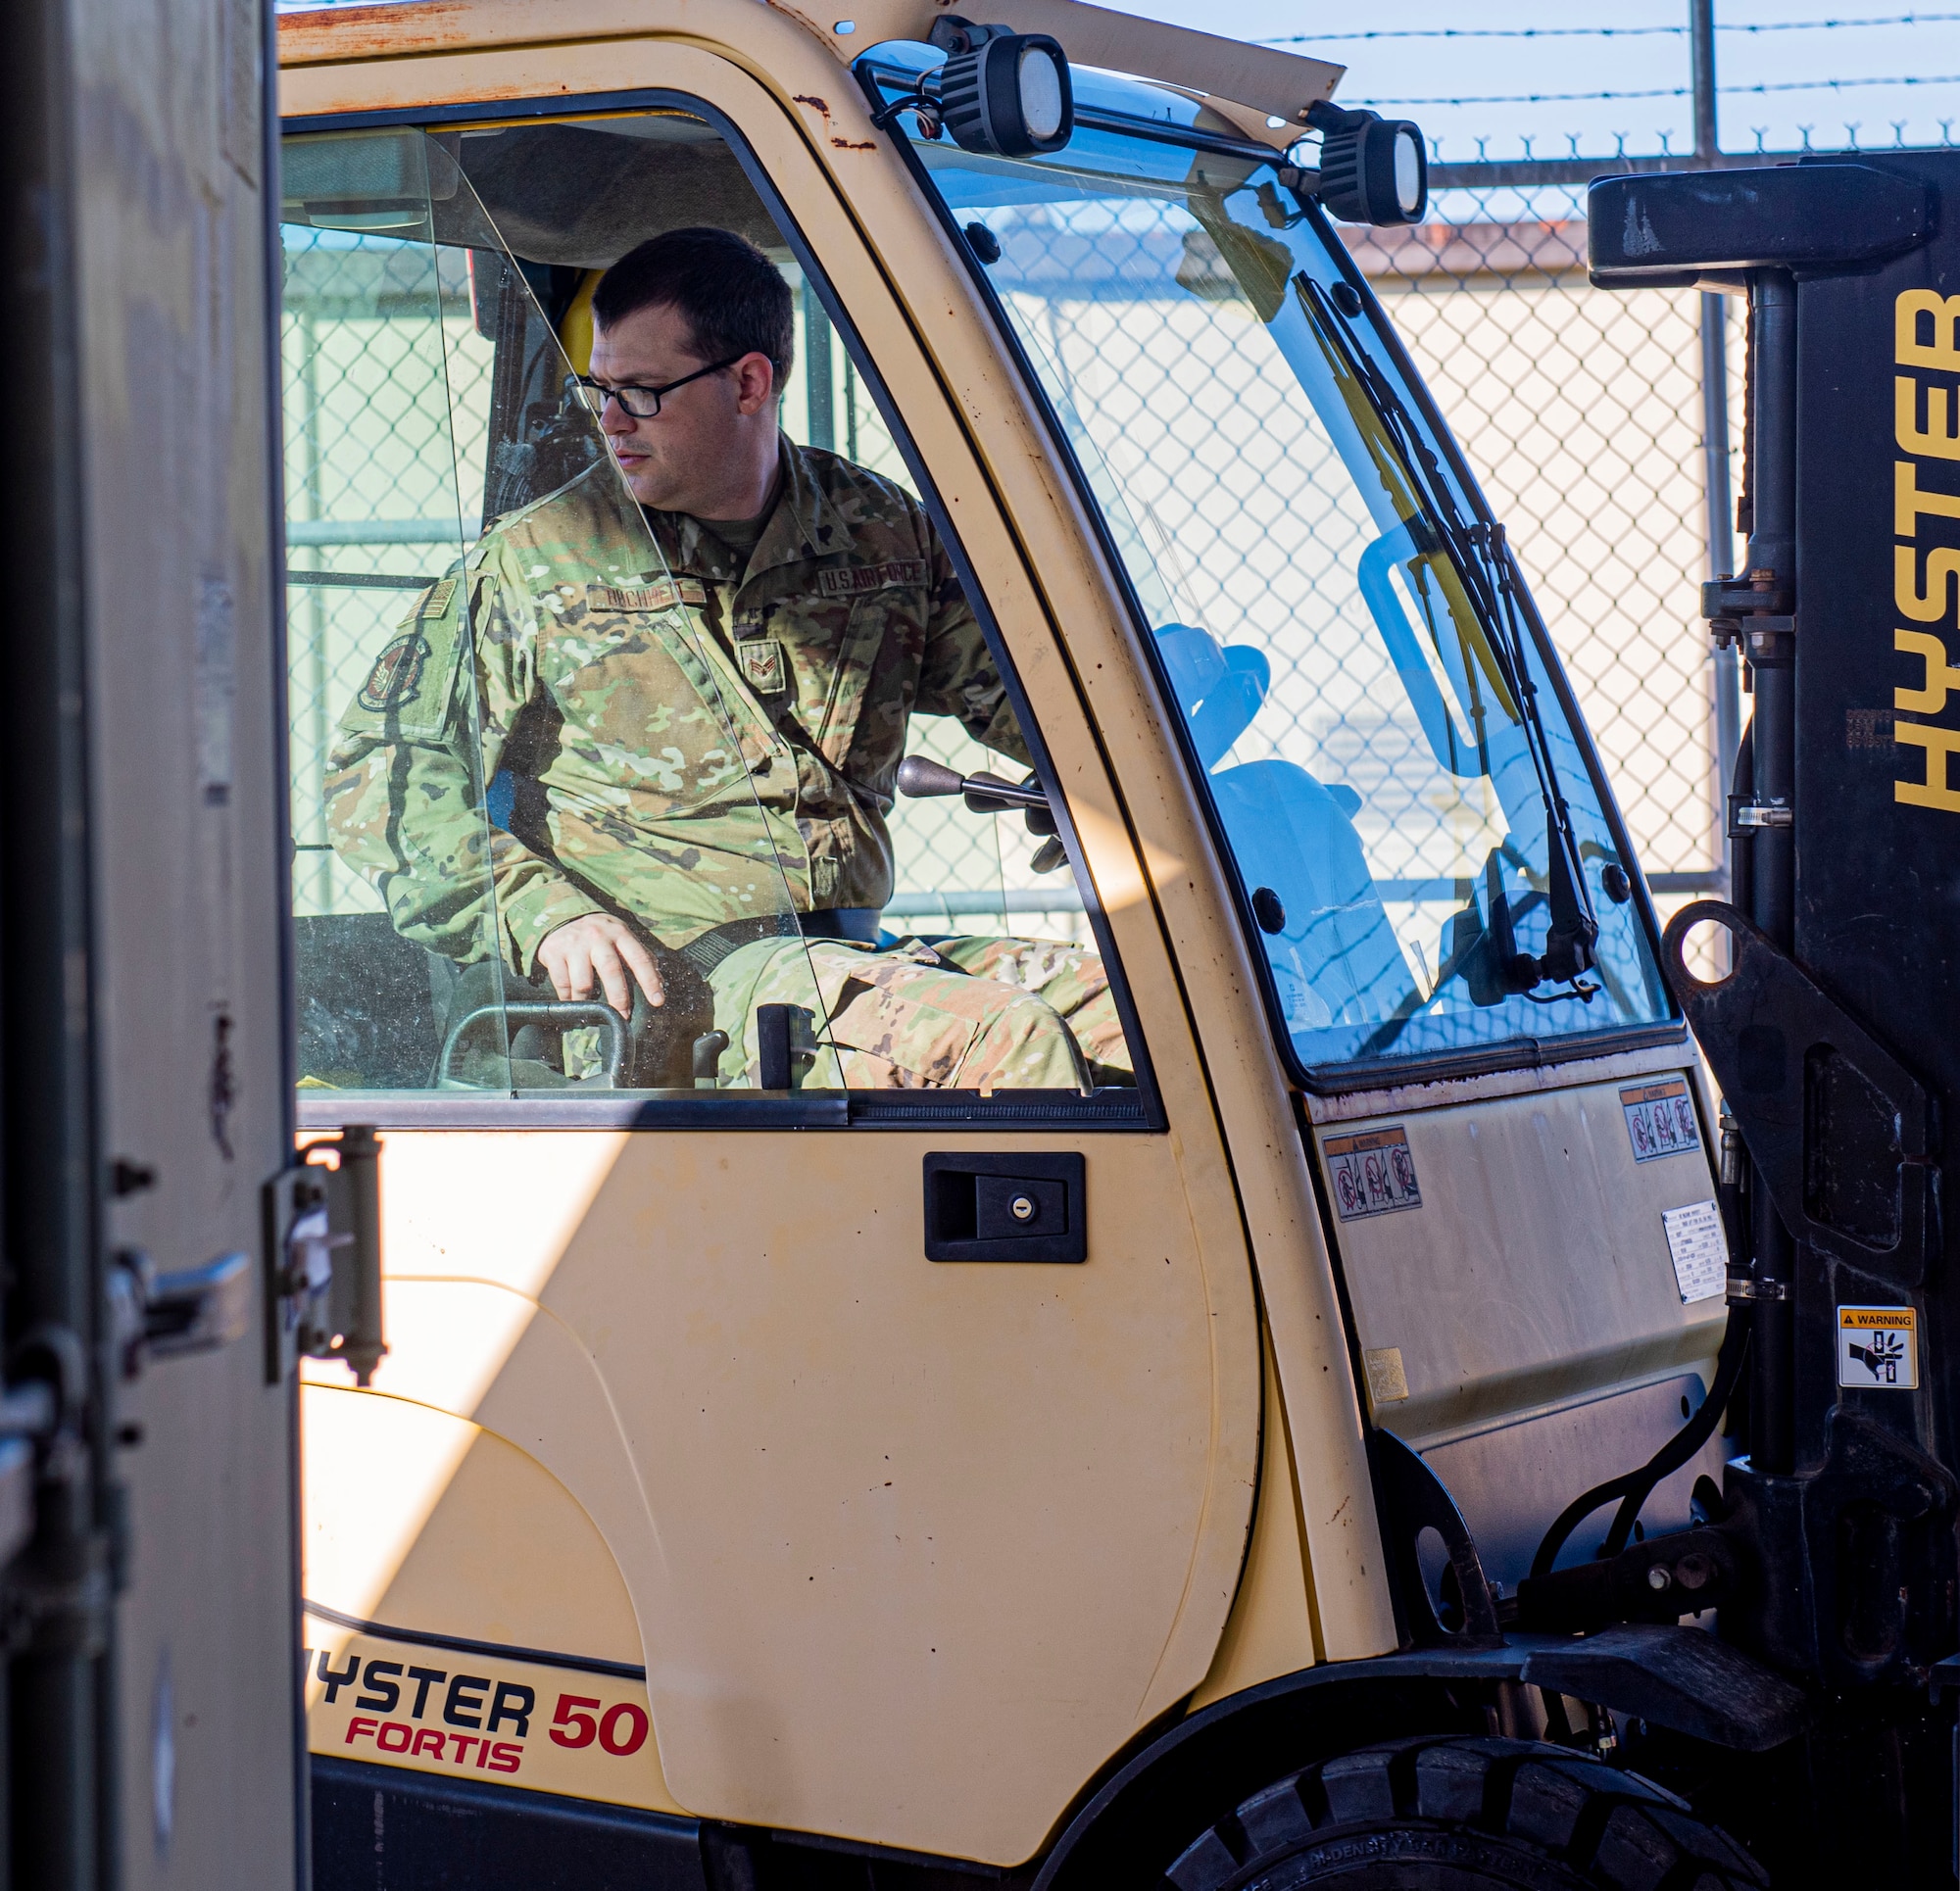 Senior Airman Dylan Buchheit, 4th Logistics Readiness Squadron material management journeyman, drives a forklift at Seymour Johnson Air Force Base, North Carolina, May 17, 2022. The hazardous material shop ensures safe protection of flammable and chemical materials. (U.S. Air Force photo by Airman 1st Class Sabrina Fuller)